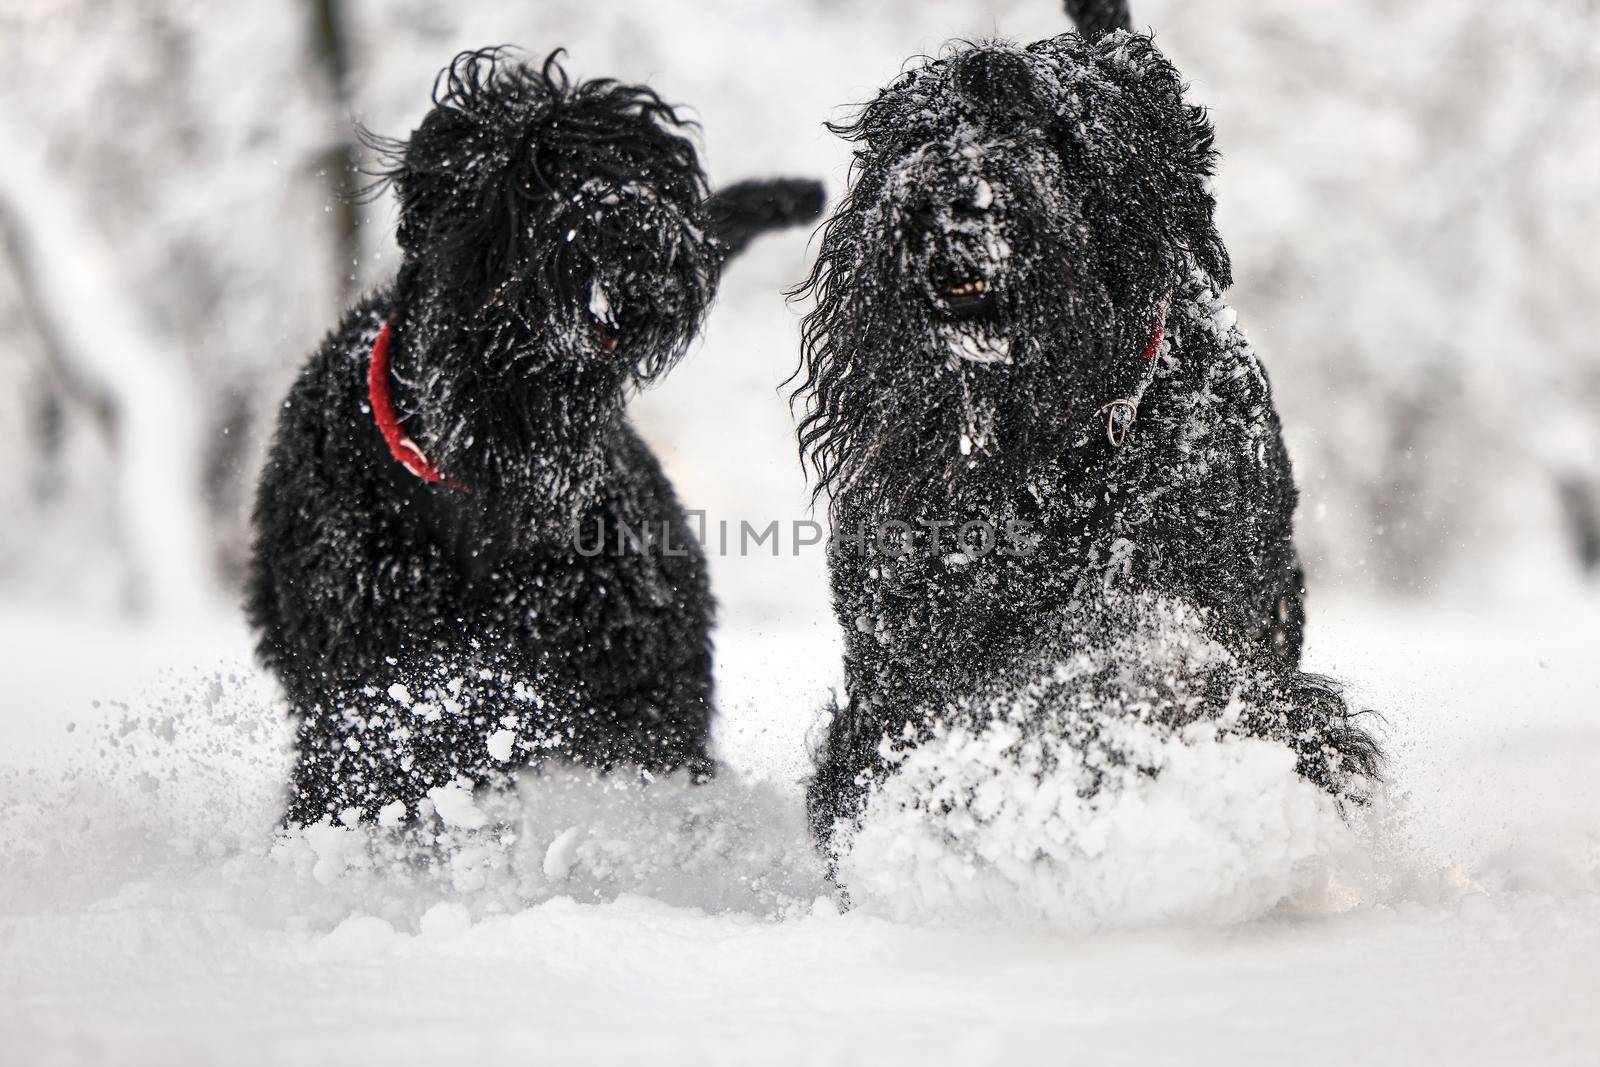 Two happy black long-haired dogs in the snow. The big dog is glad of the snow. A black dog in the snow. Russian black terrier walking in a snowy park. What happens if you walk your dog in winter.